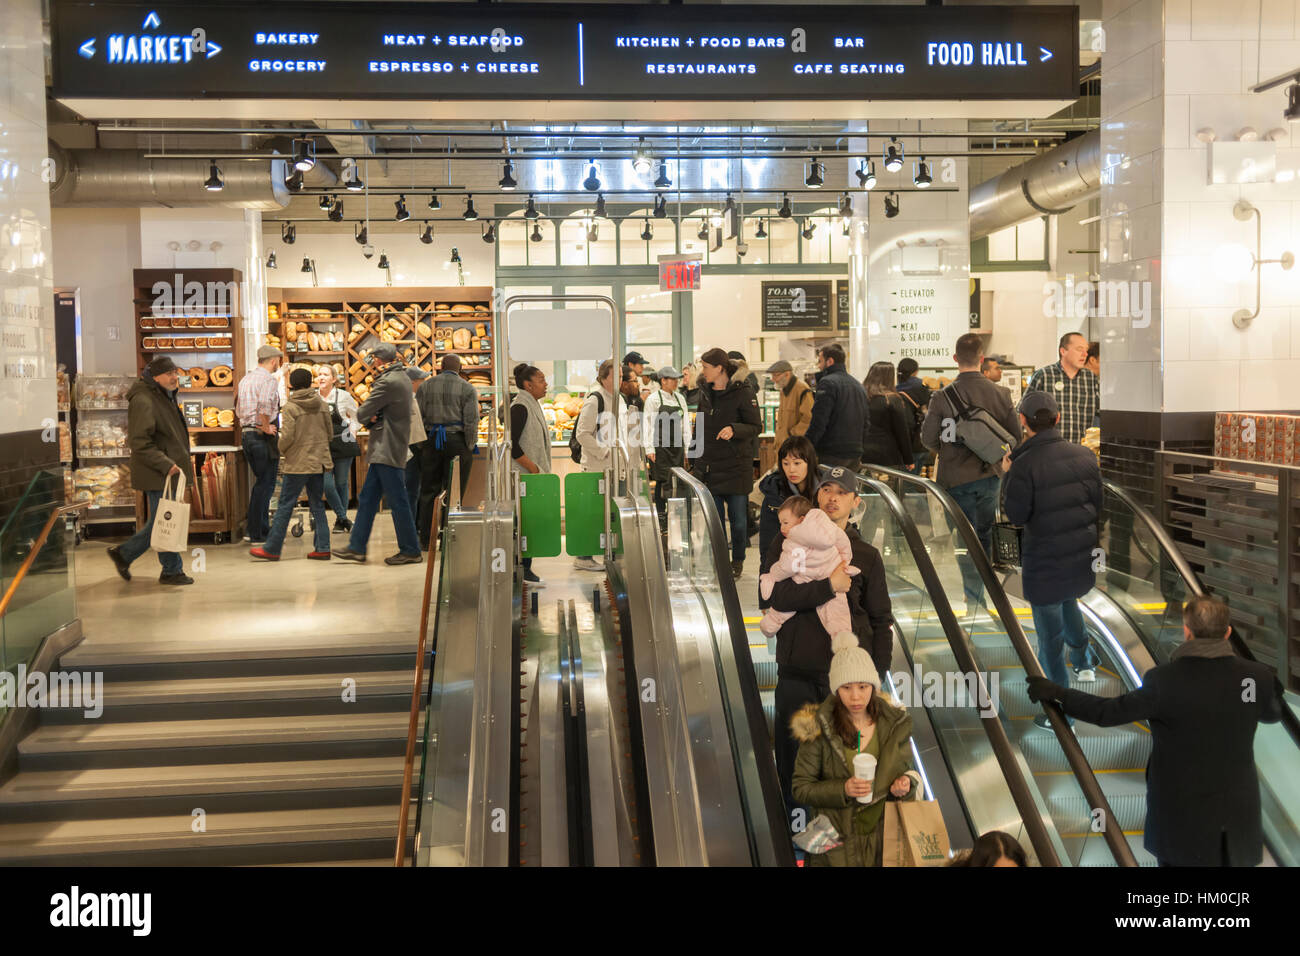 Coronavirus in NYC: Whole Foods Bryant Park Becomes Online Only - Eater NY